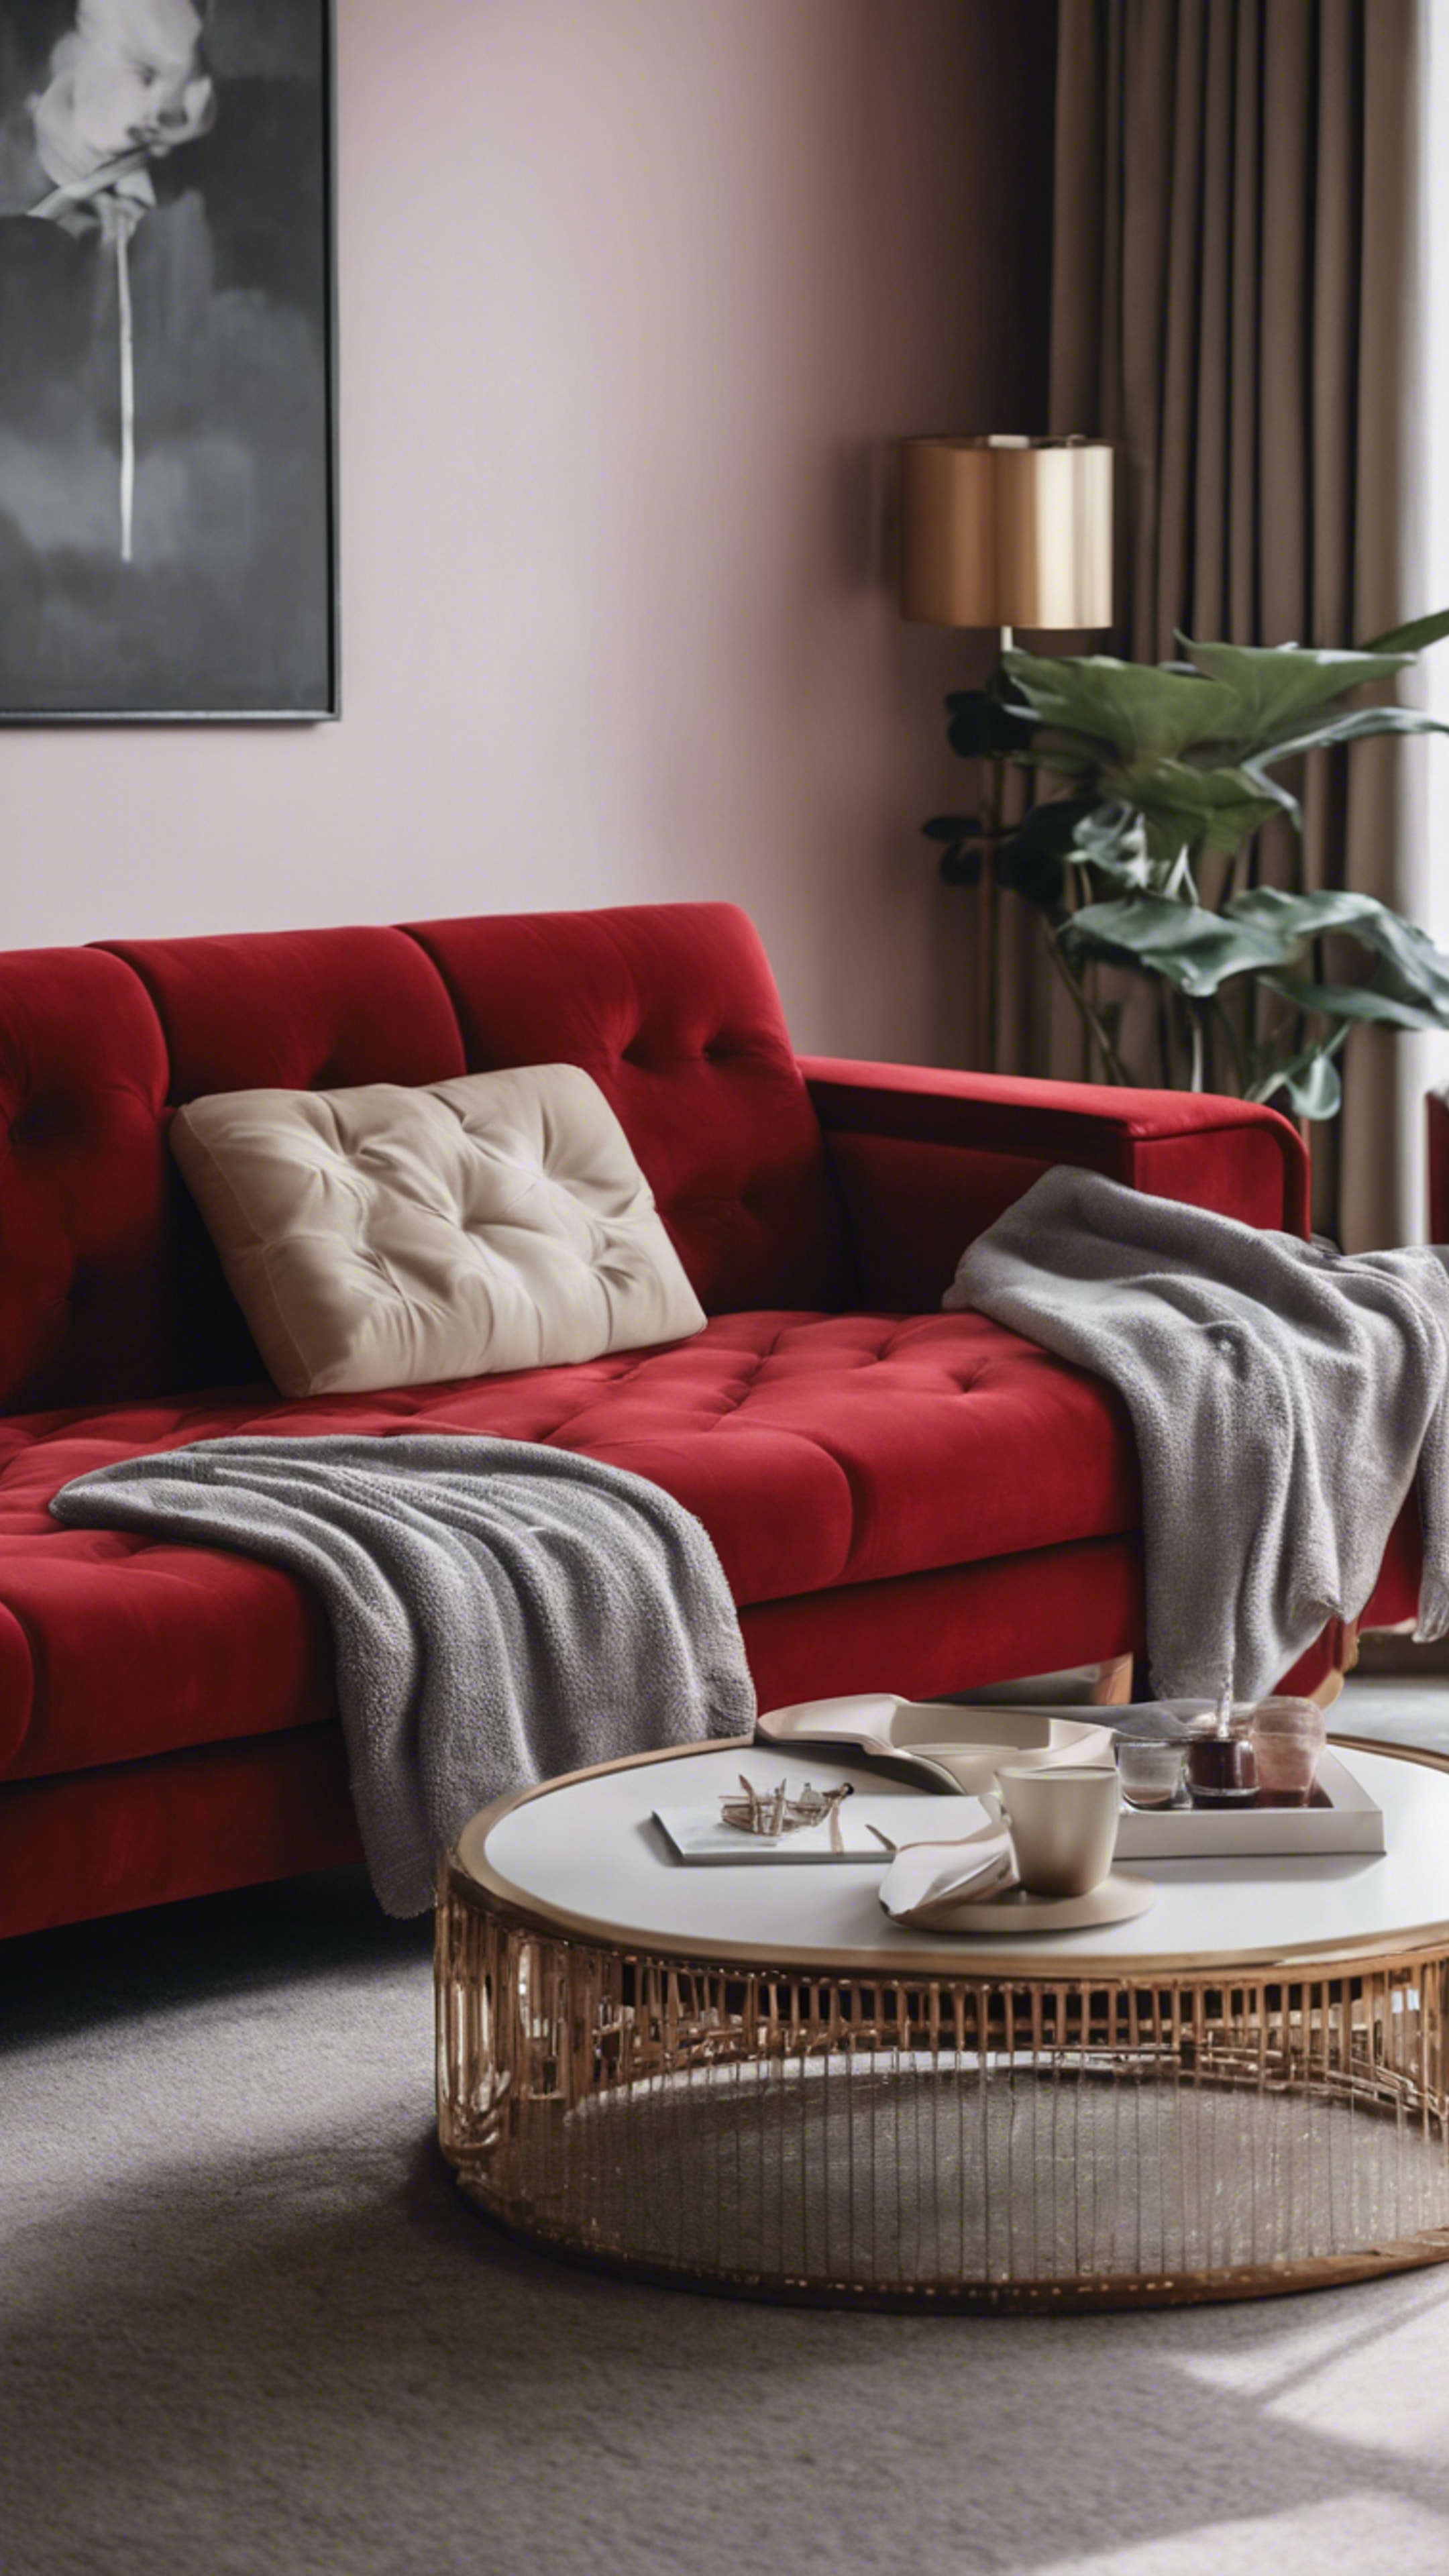 A luxurious red velvet sofa in a minimalistic modern living room, its color standing out in an otherwise neutral scene. Behang[9f5c54c2b7d04d069b86]